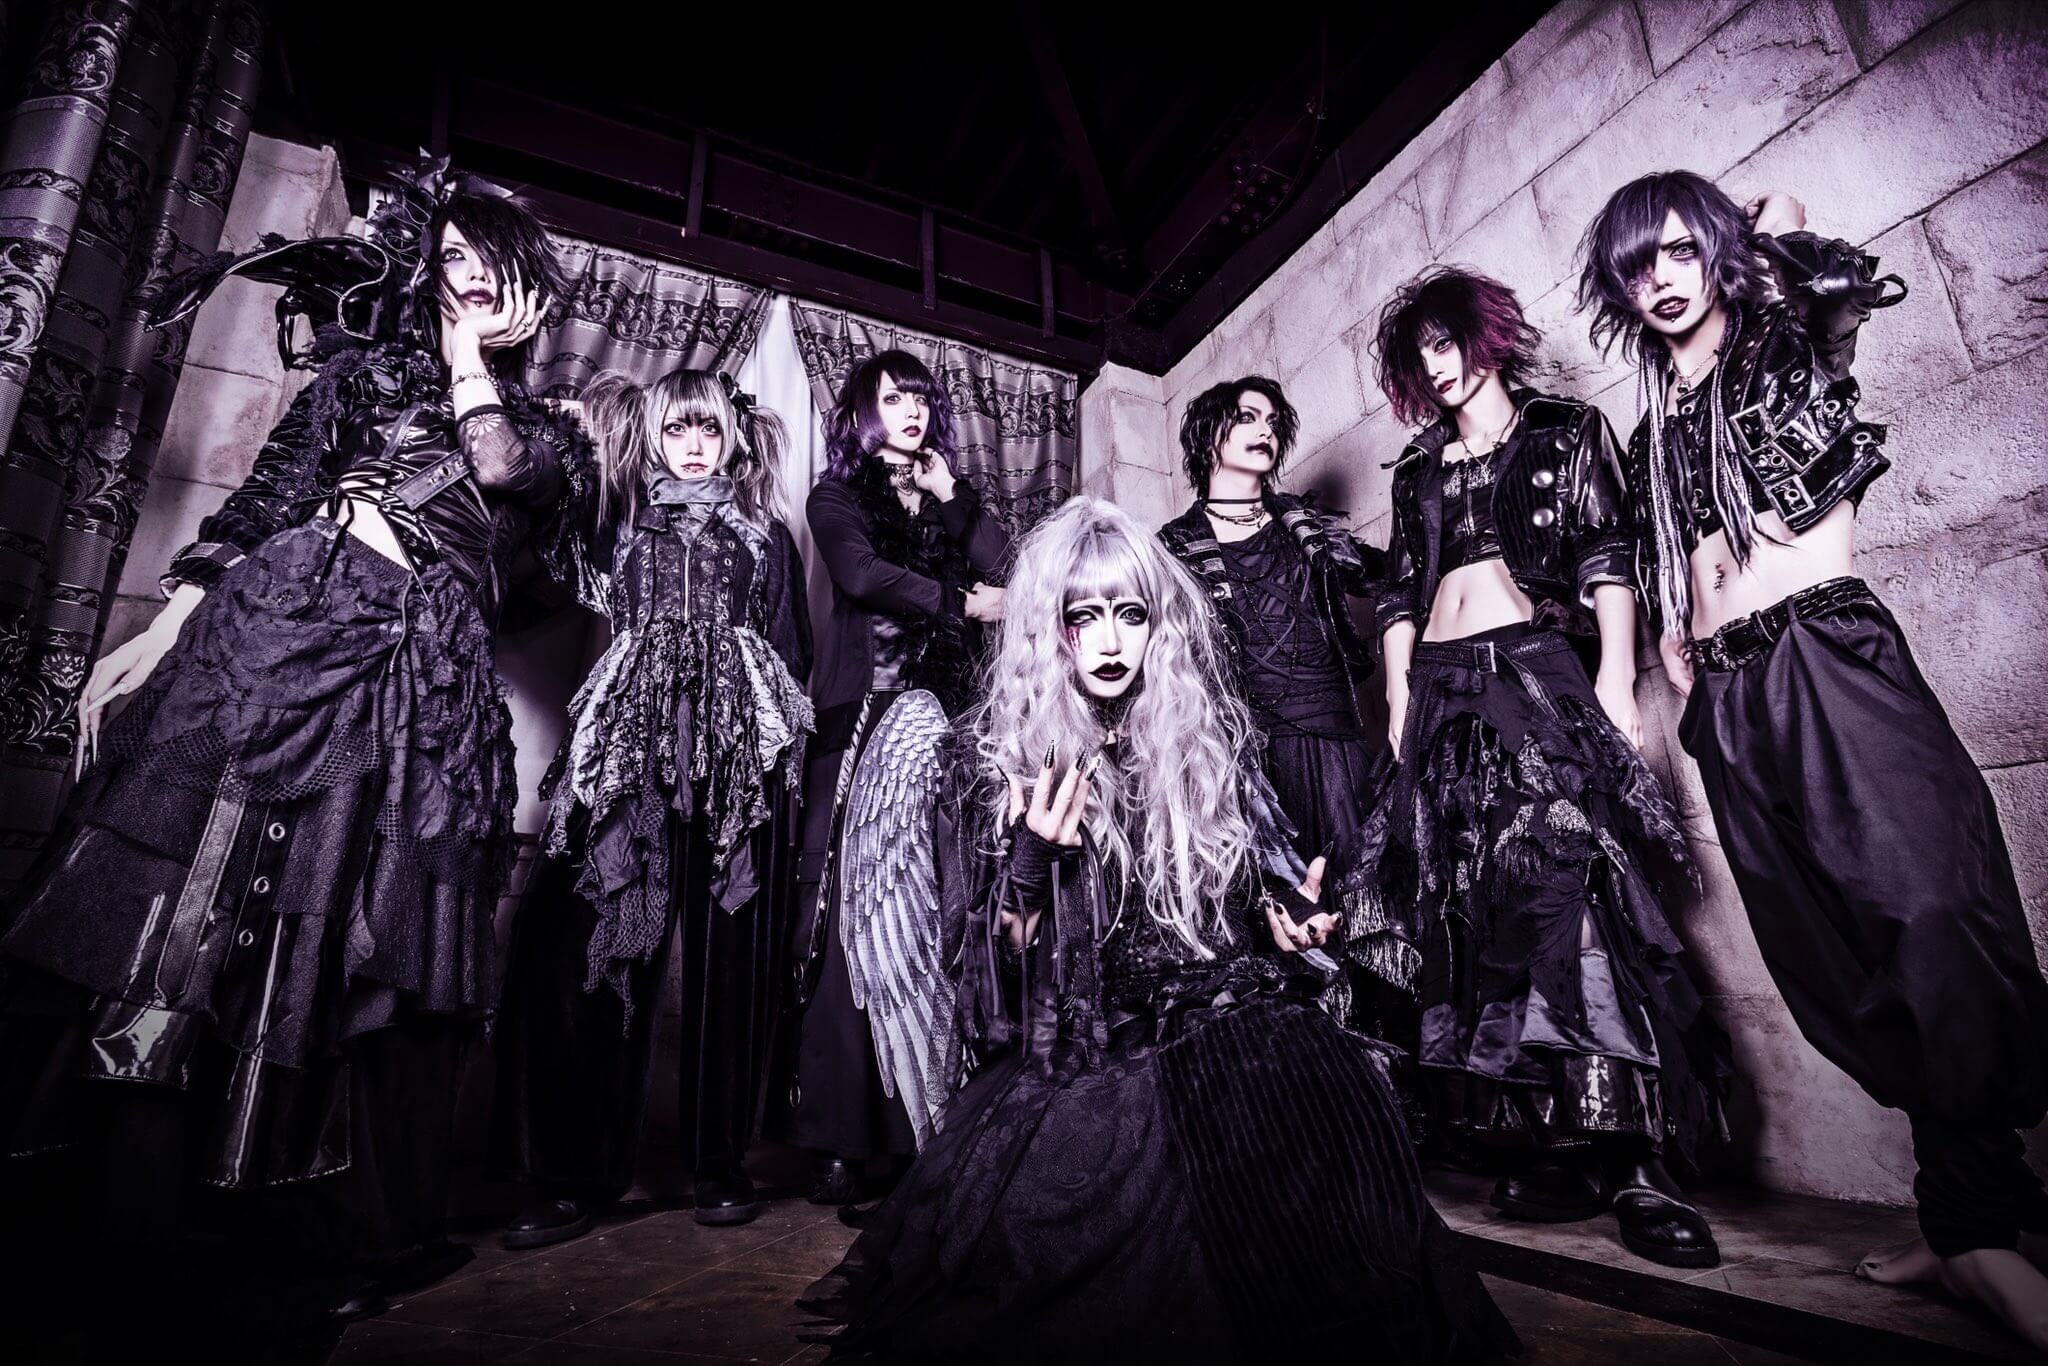 New single "-SEVEN-" + new members join R.I.P. to become a 7-member band!